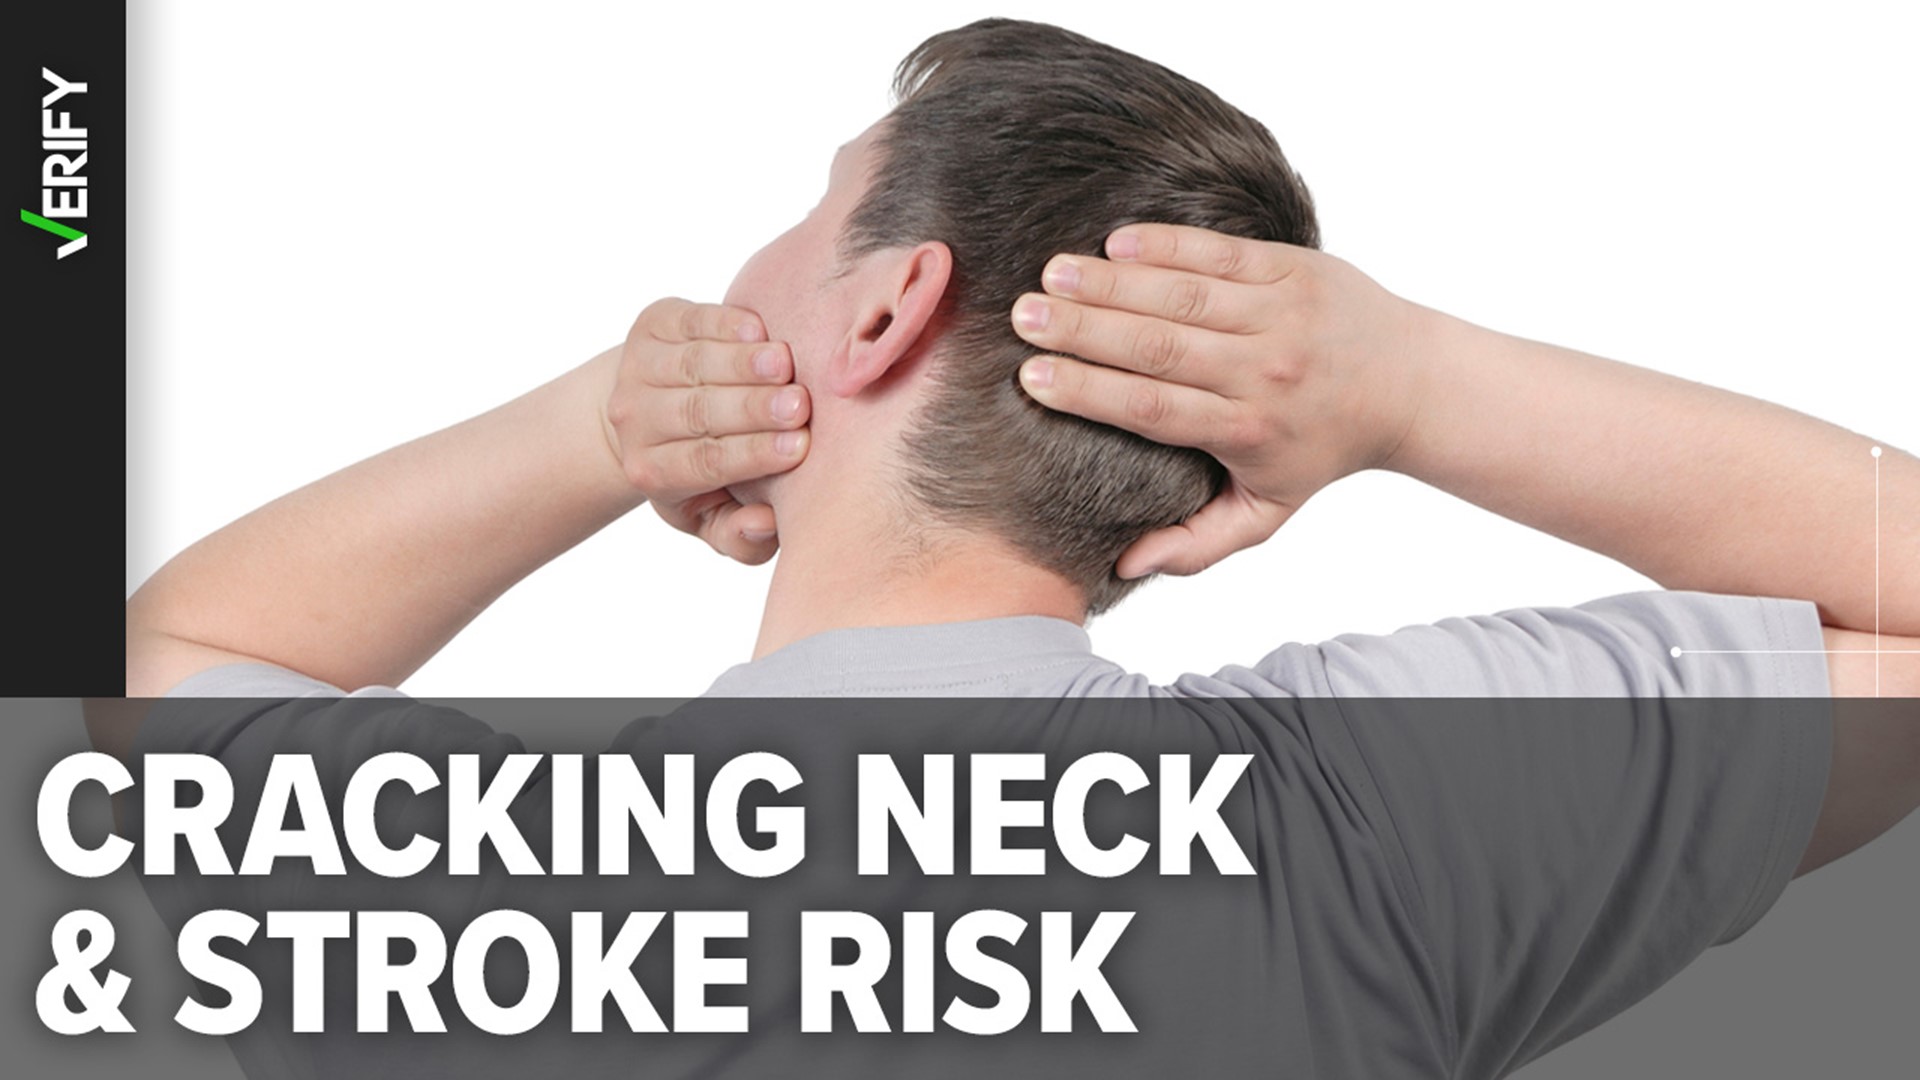 The dangers of cracking your neck could include a vertebral artery dissection and stroke, but it’s very rare.